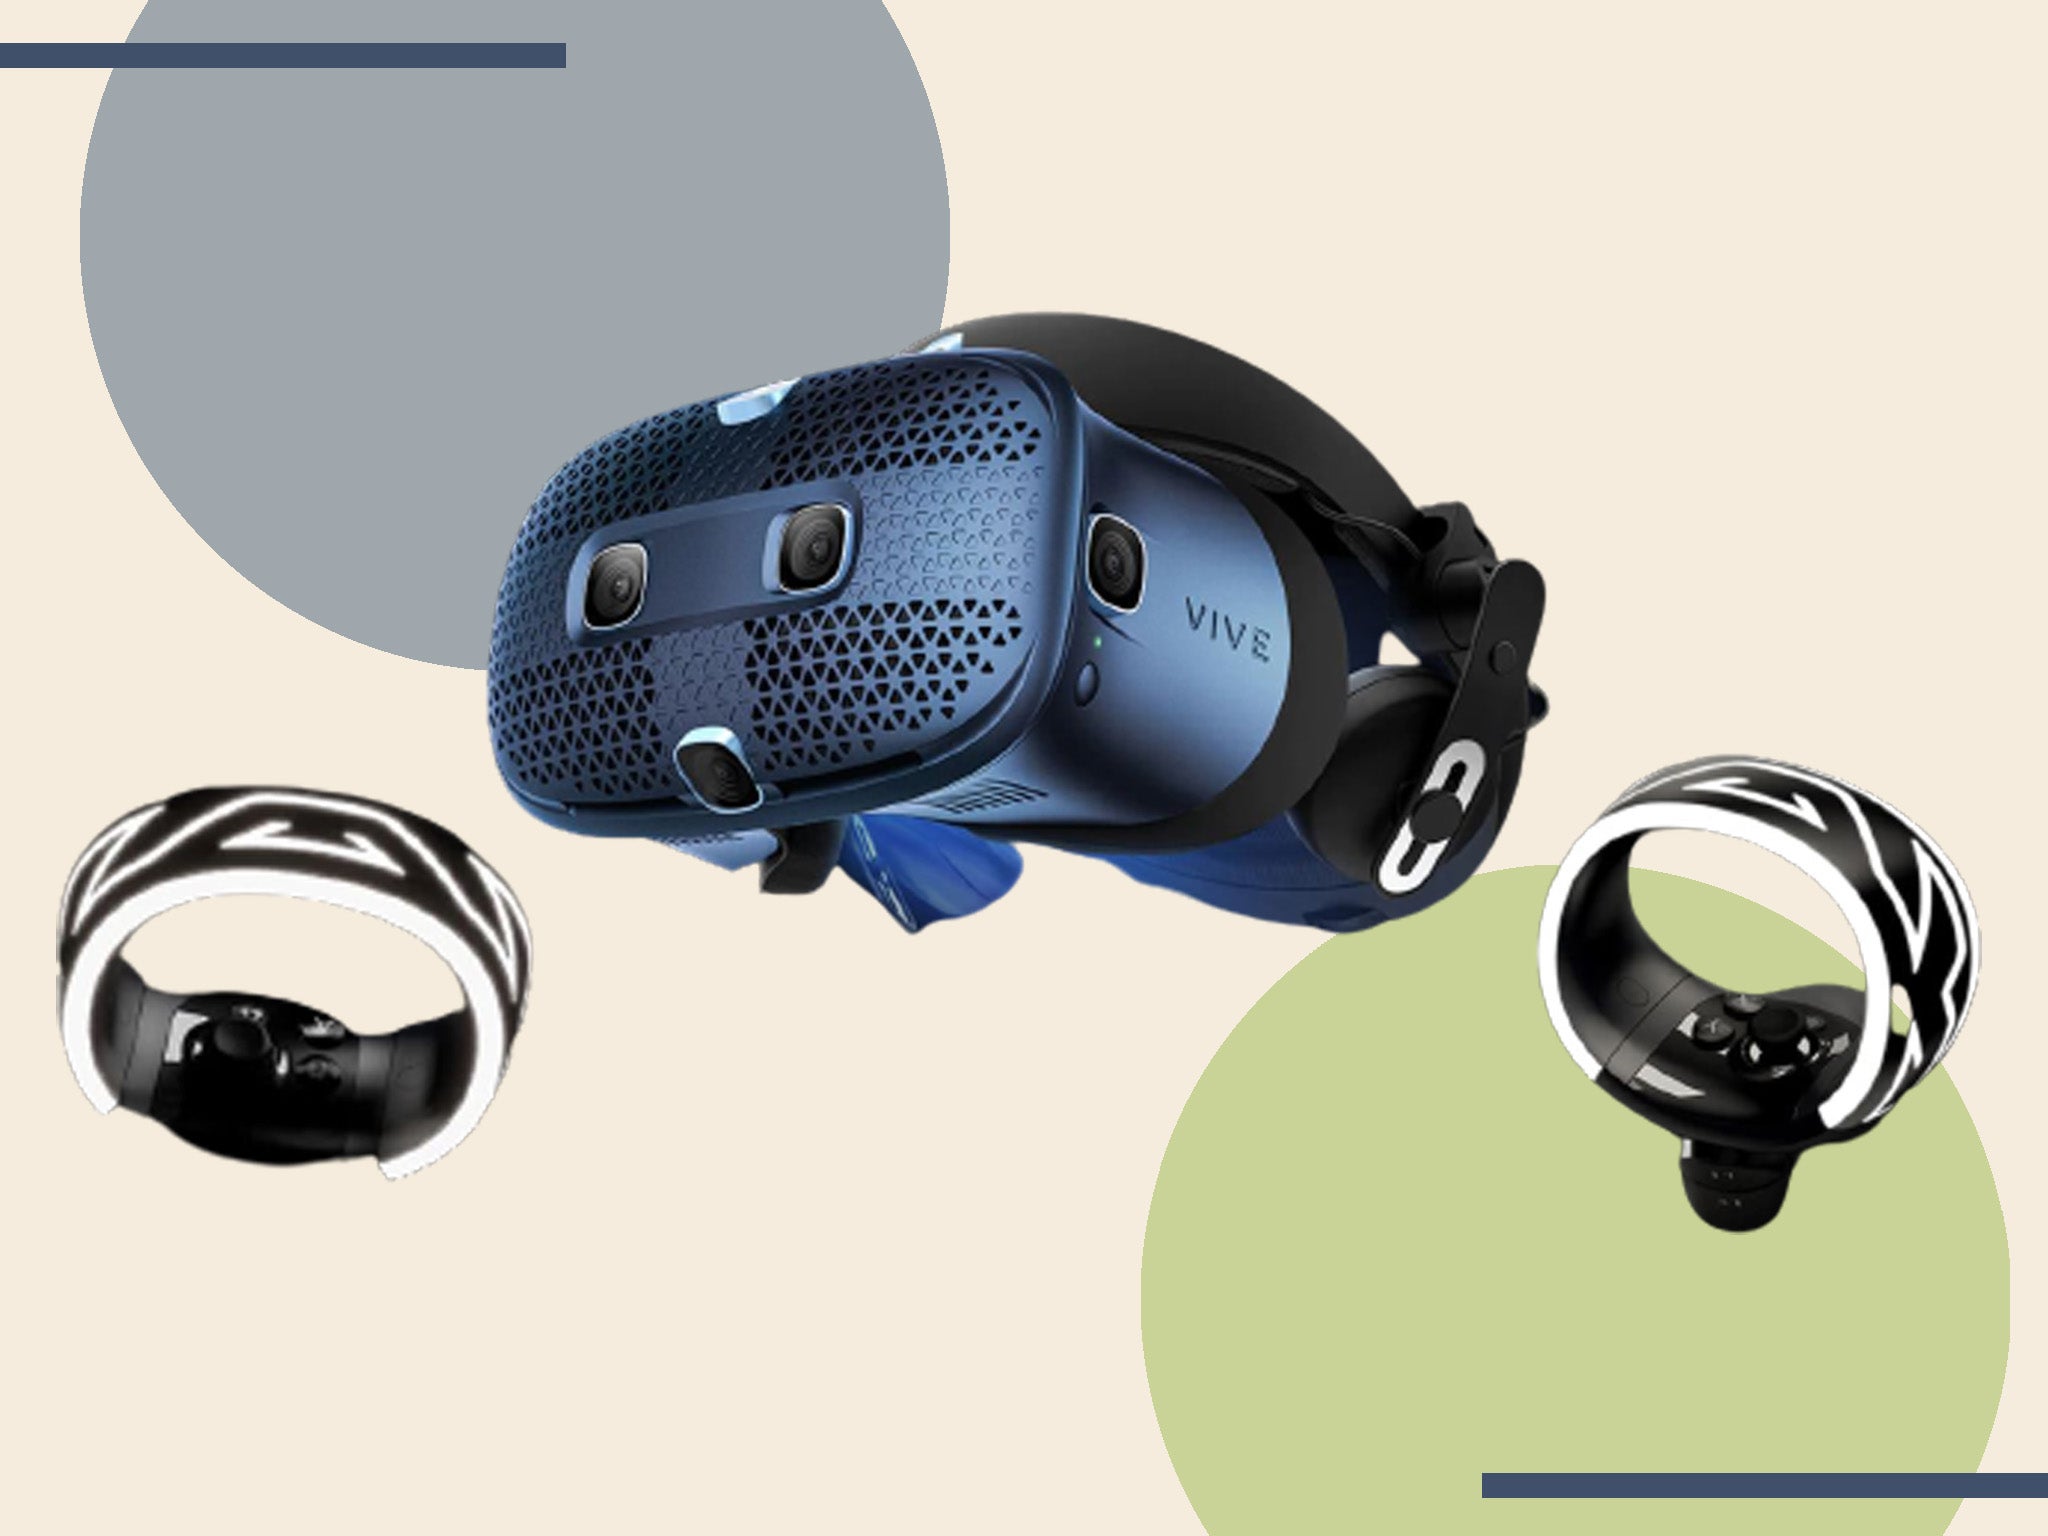 At £499, the entry-level Vive cosmos is the cheapest it’s ever been